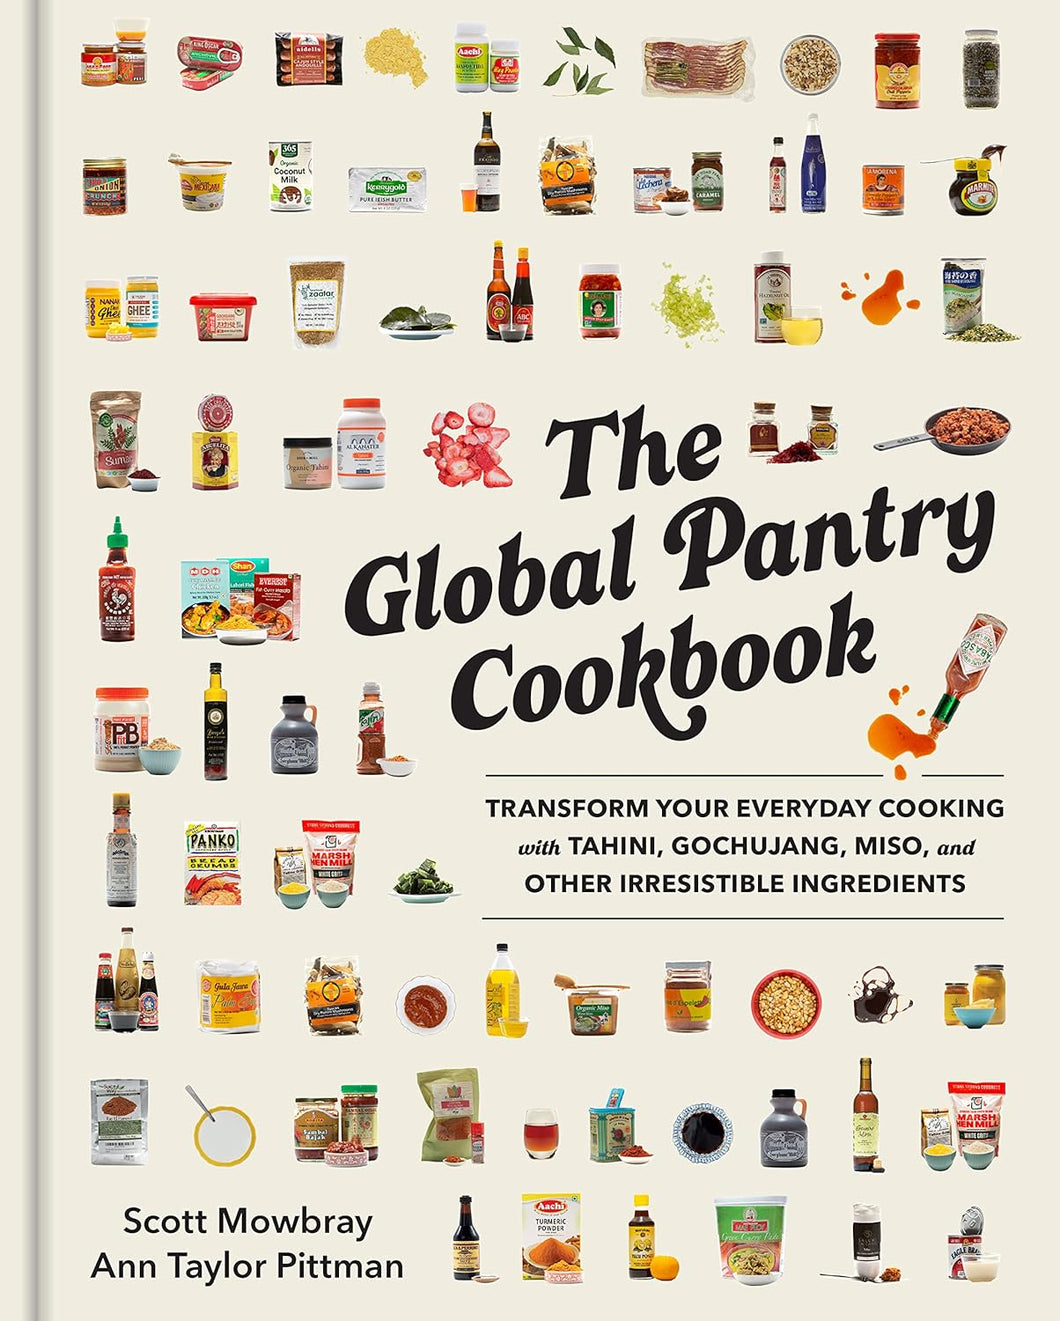 The Global Pantry Cookbook: Transform Your Everyday Cooking with Tahini, Gochujang, Miso, and Other Irresistible Ingredients by Scott Mowbray and Ann Taylor Pittman